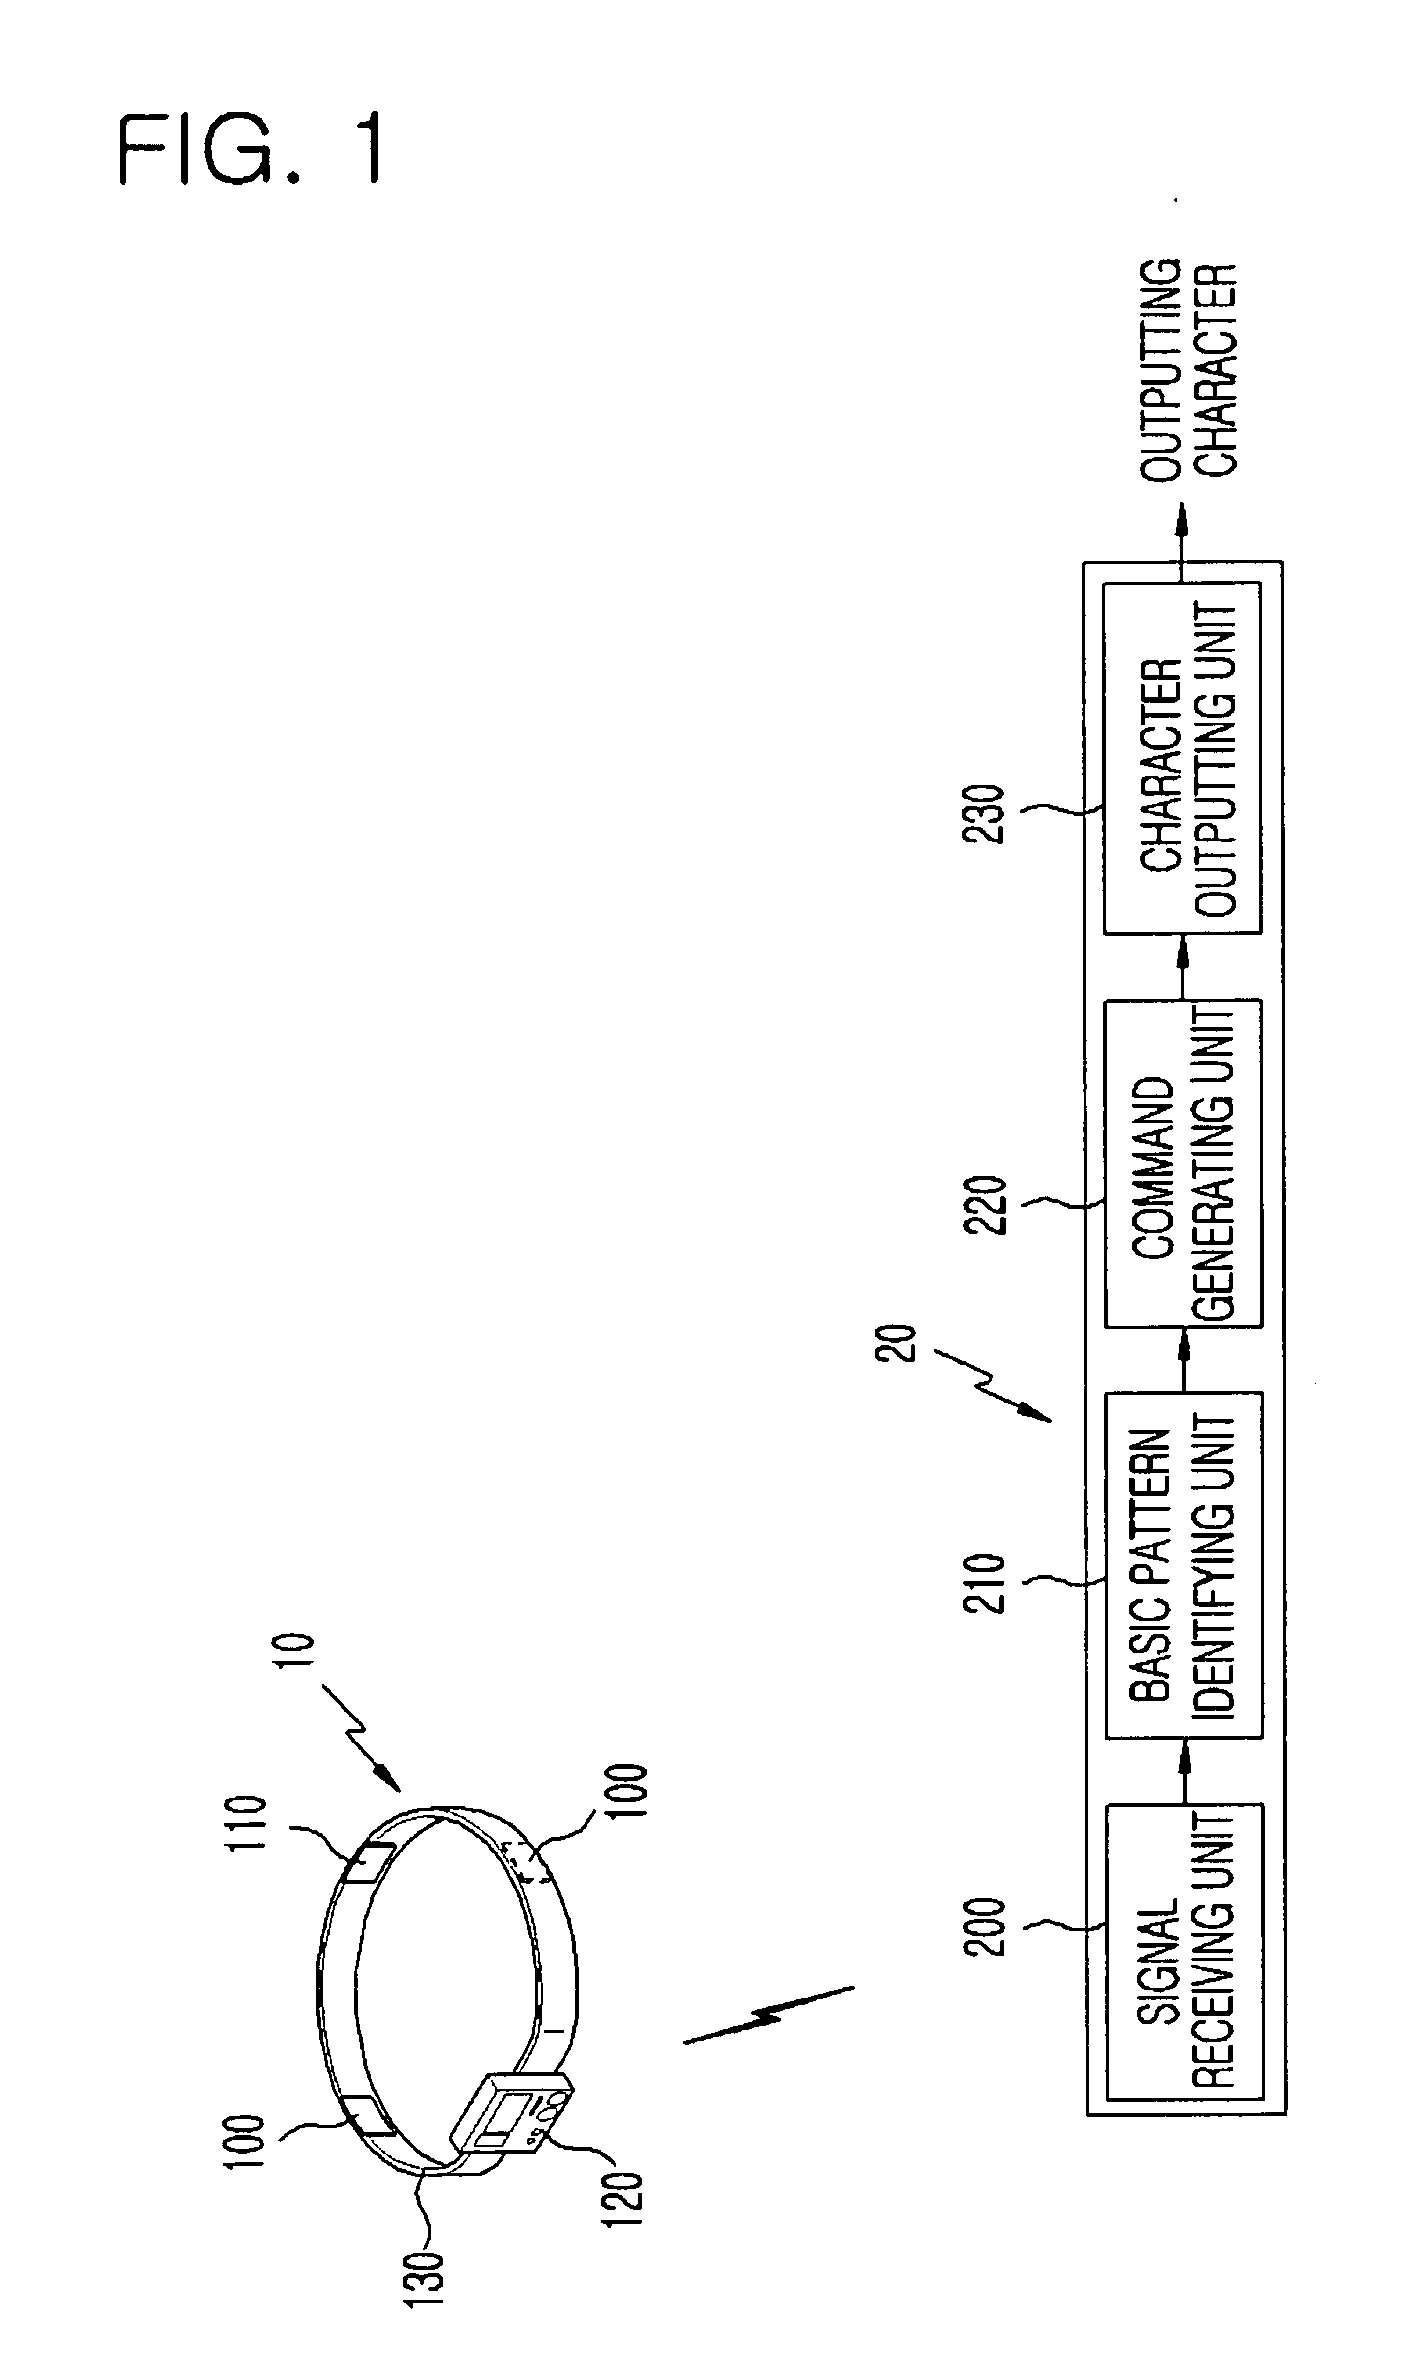 Apparatus and method for selecting and outputting character by teeth-clenching